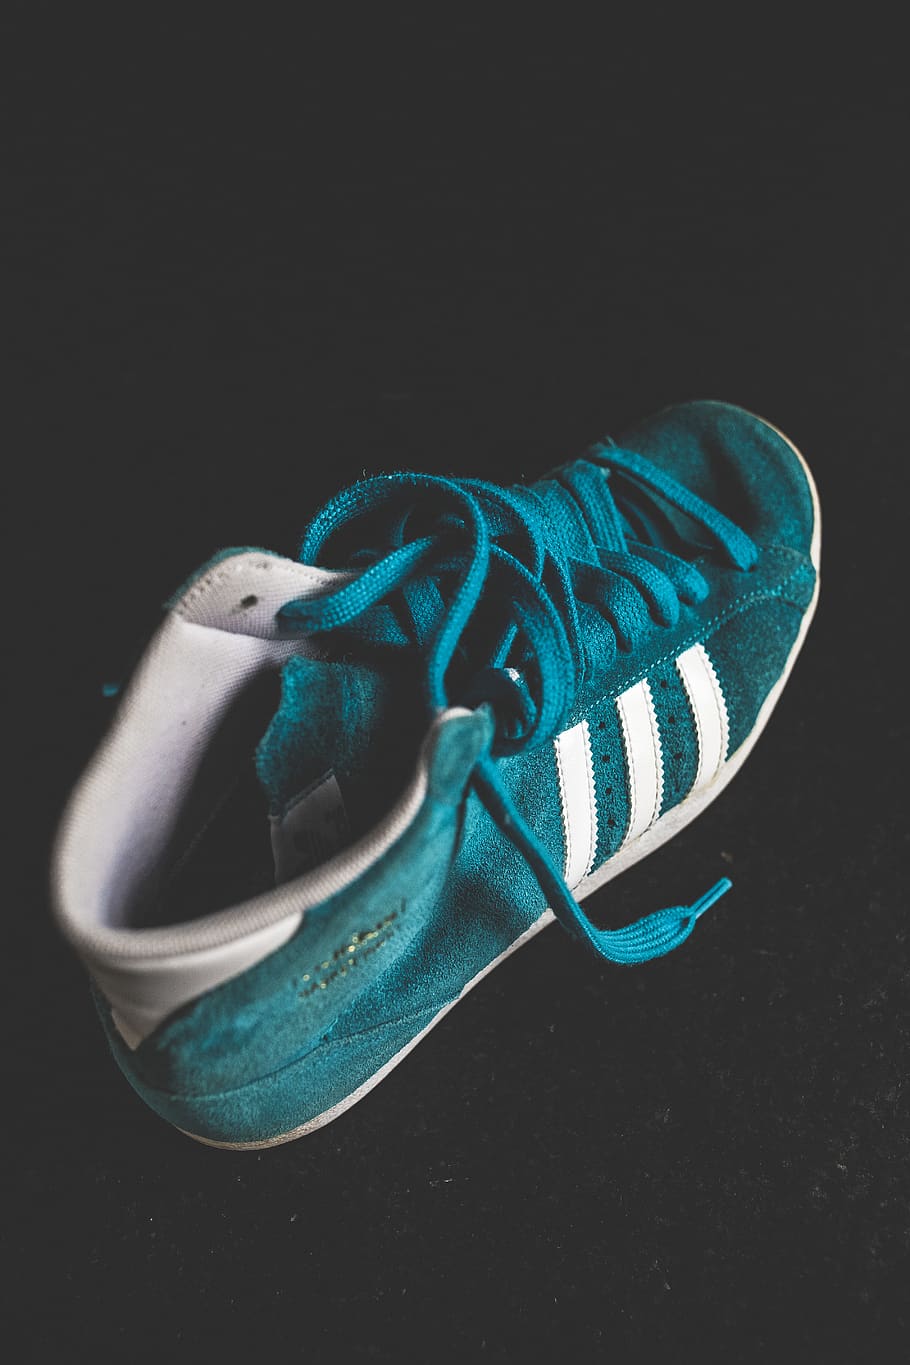 Close-up Photo of a Suede Turquoise and White Adidas High-top Sneaker